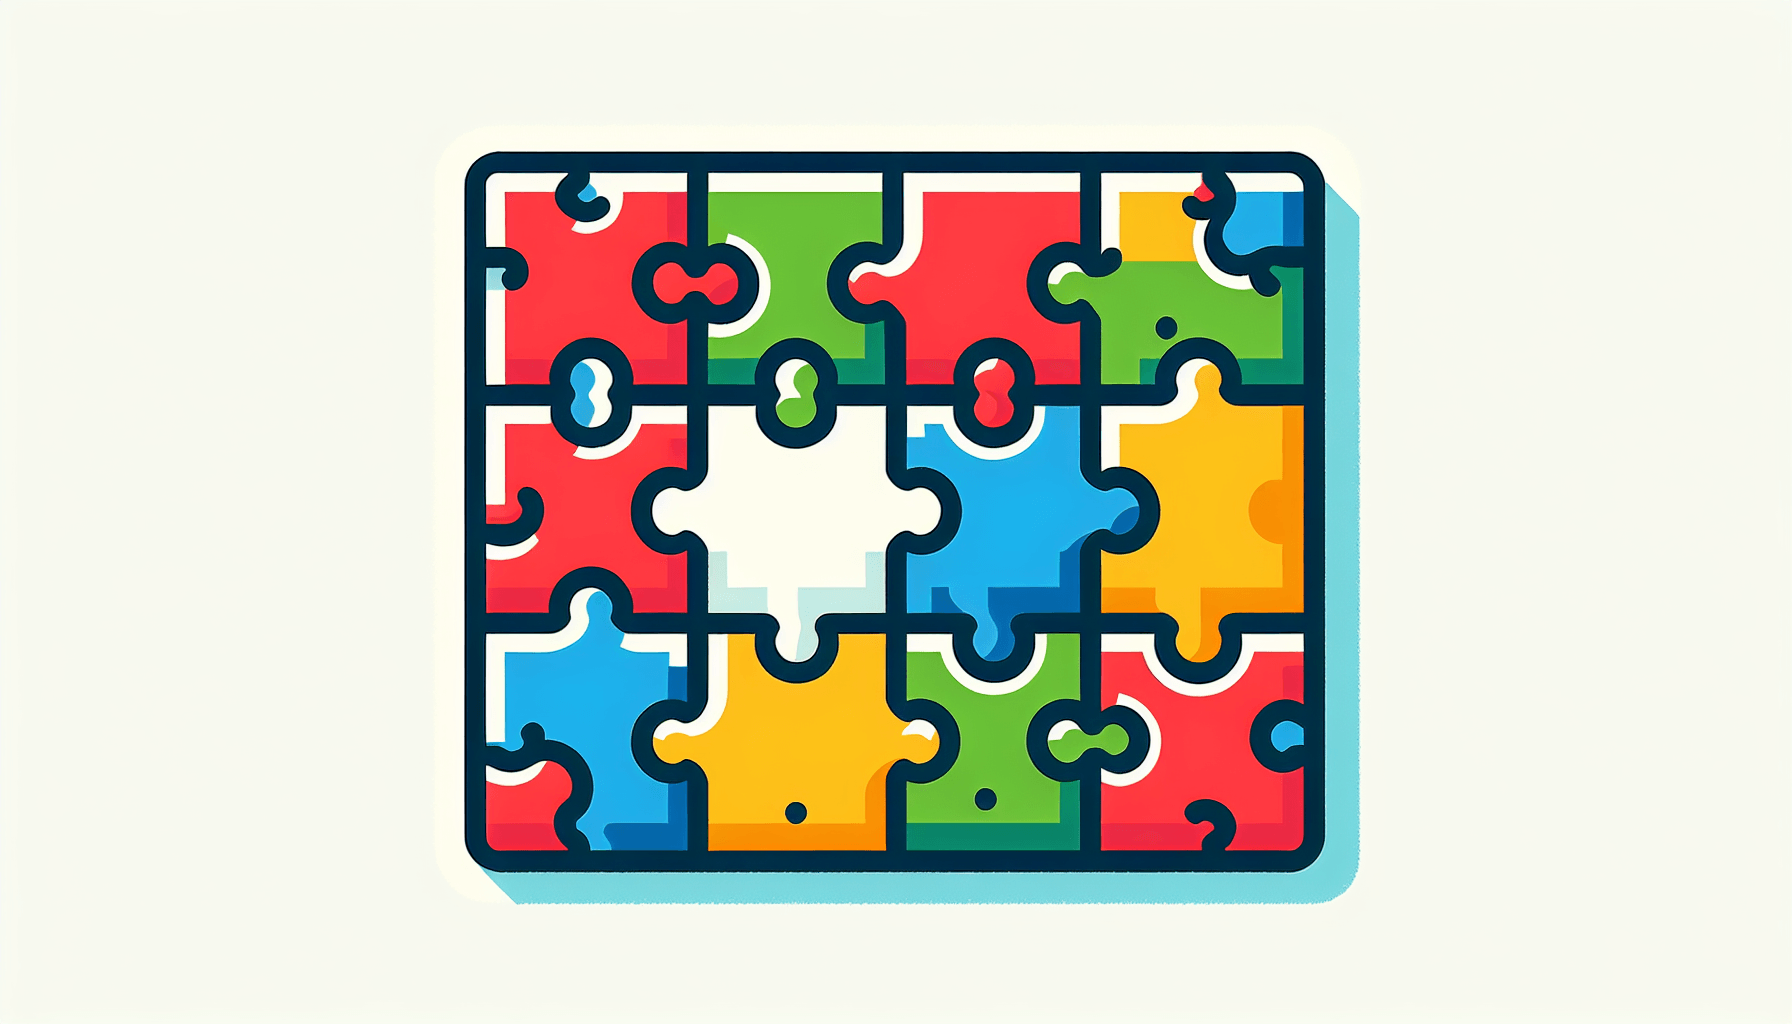 Jigsaw puzzle in flat illustration style and white background, red #f47574, green #88c7a8, yellow #fcc44b, and blue #645bc8 colors.